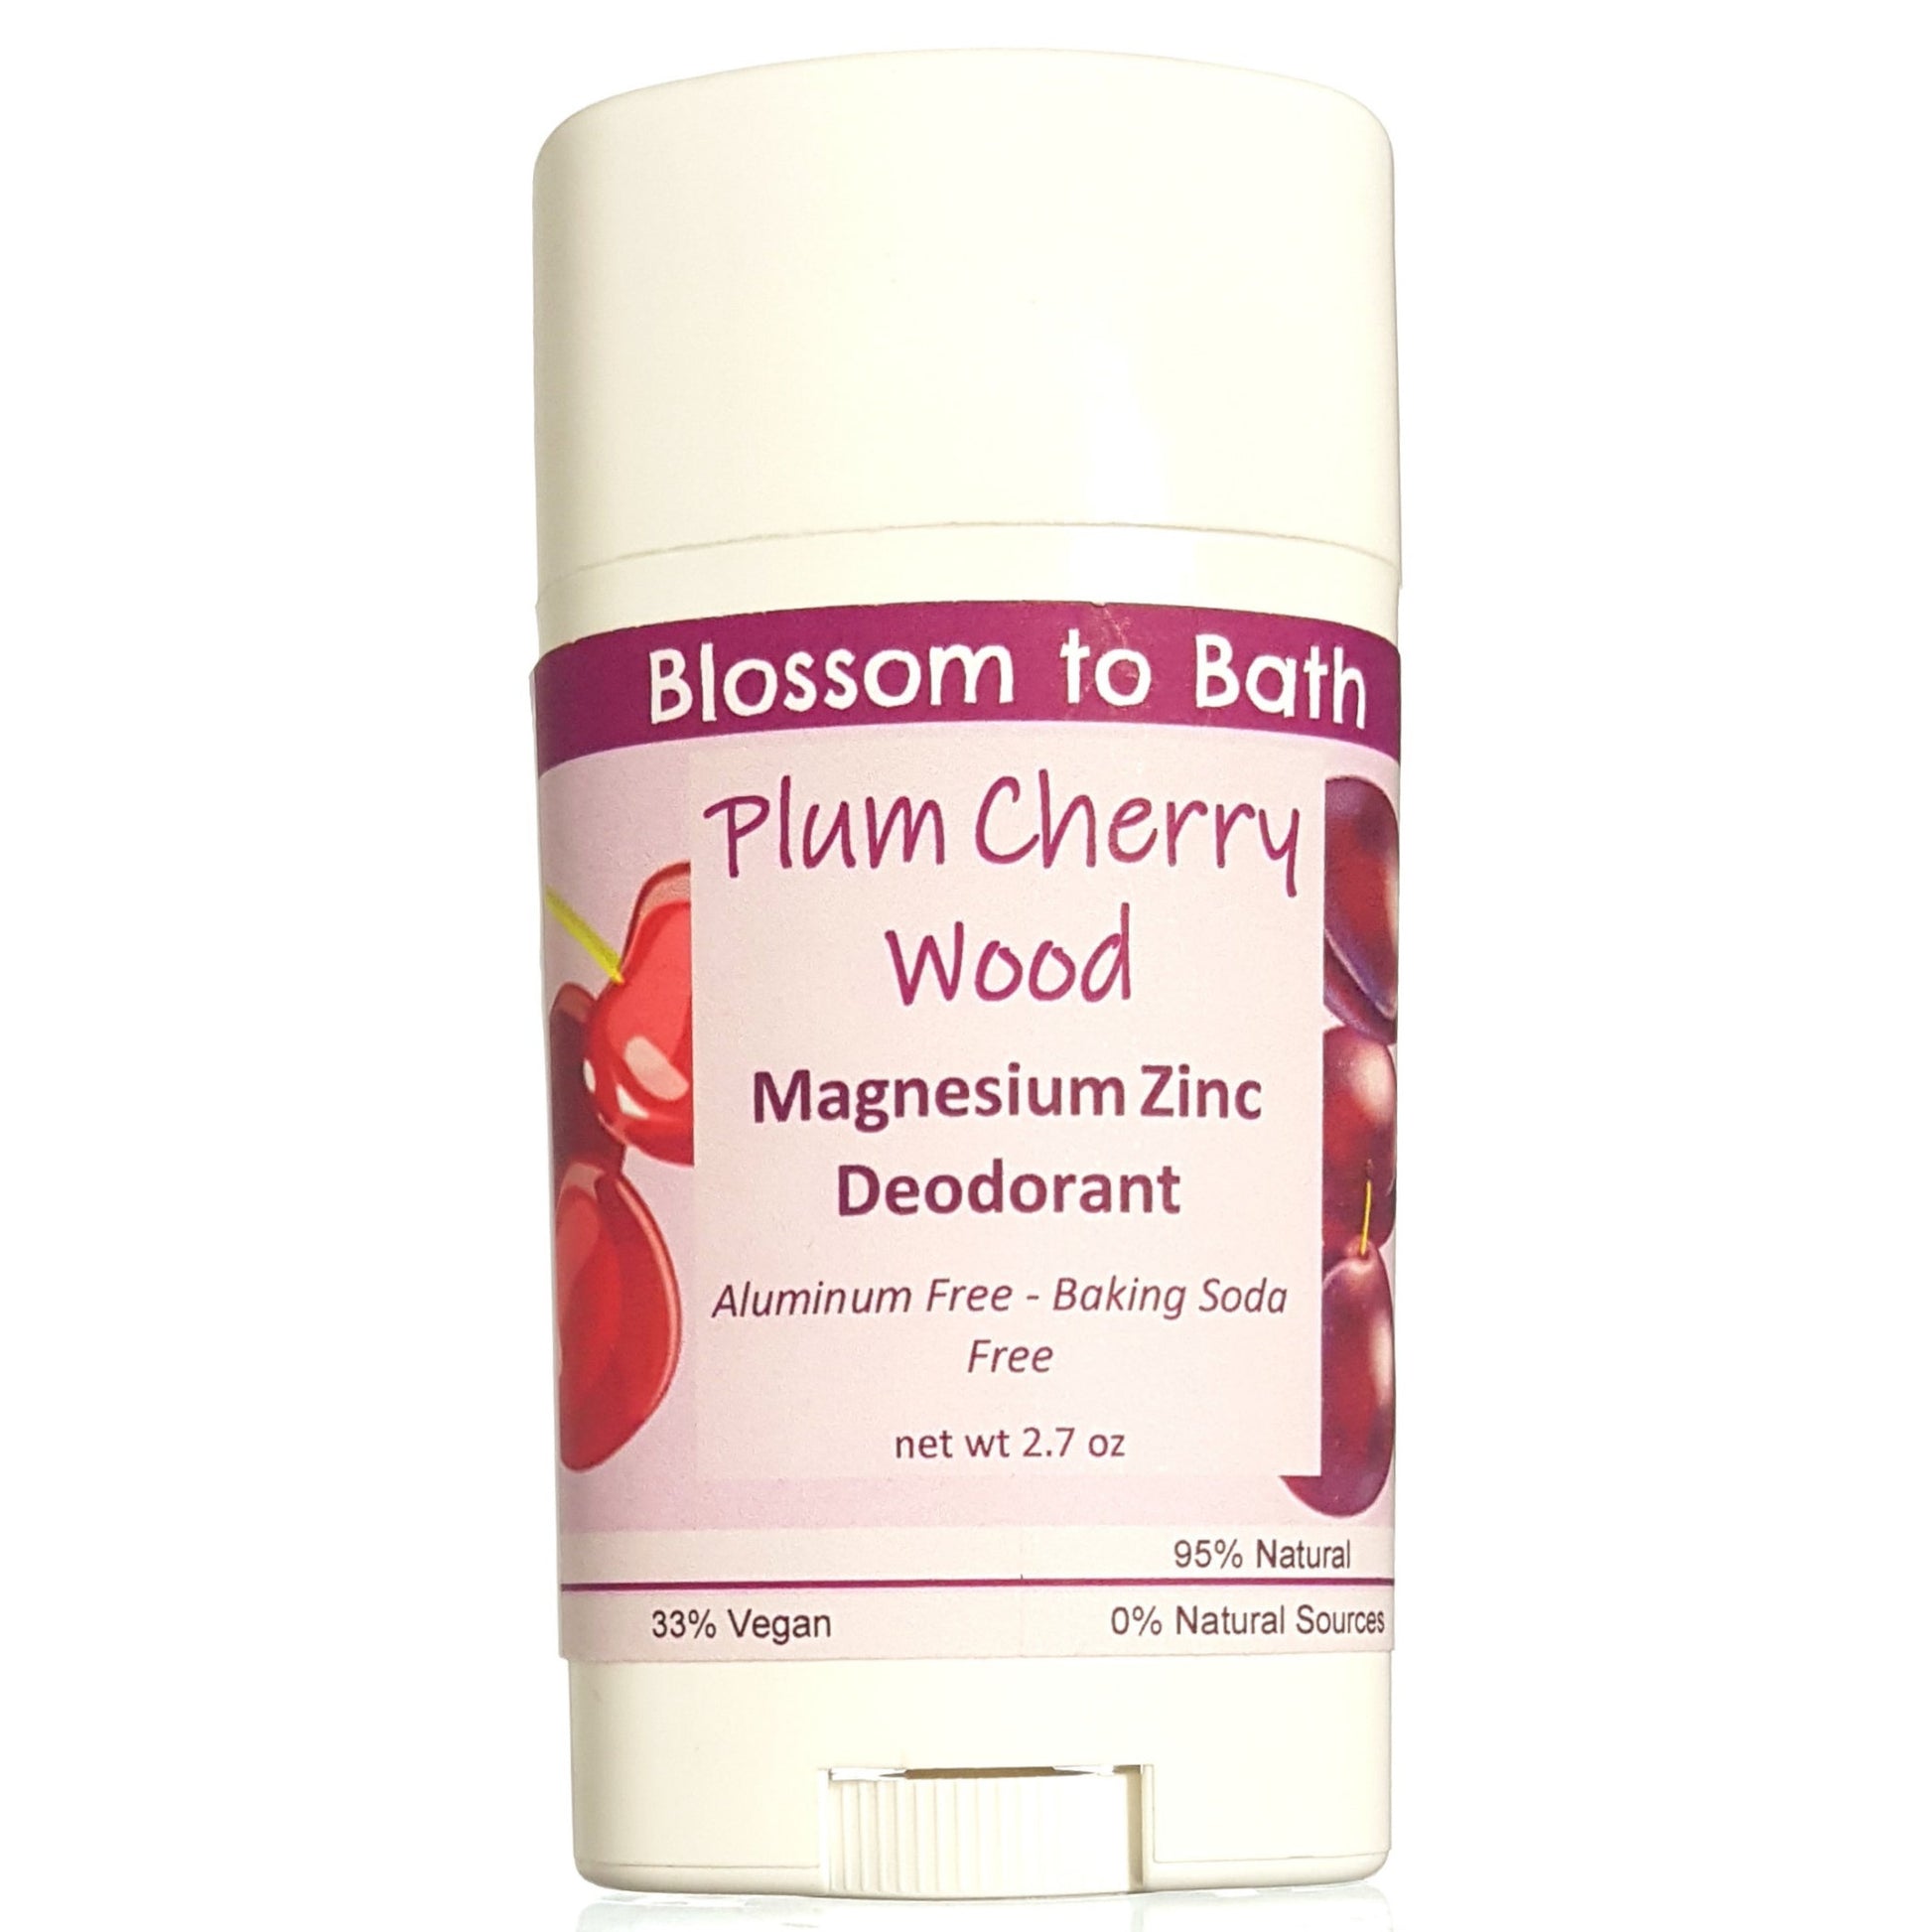 Buy Blossom to Bath Plum Cherry Wood Magnesium Zinc Deodorant from Flowersong Soap Studio.  Long lasting protection made from organic botanicals and butters, made without baking soda, tested in the Arizona heat  A charmingly sweet and woodsy fragrance.